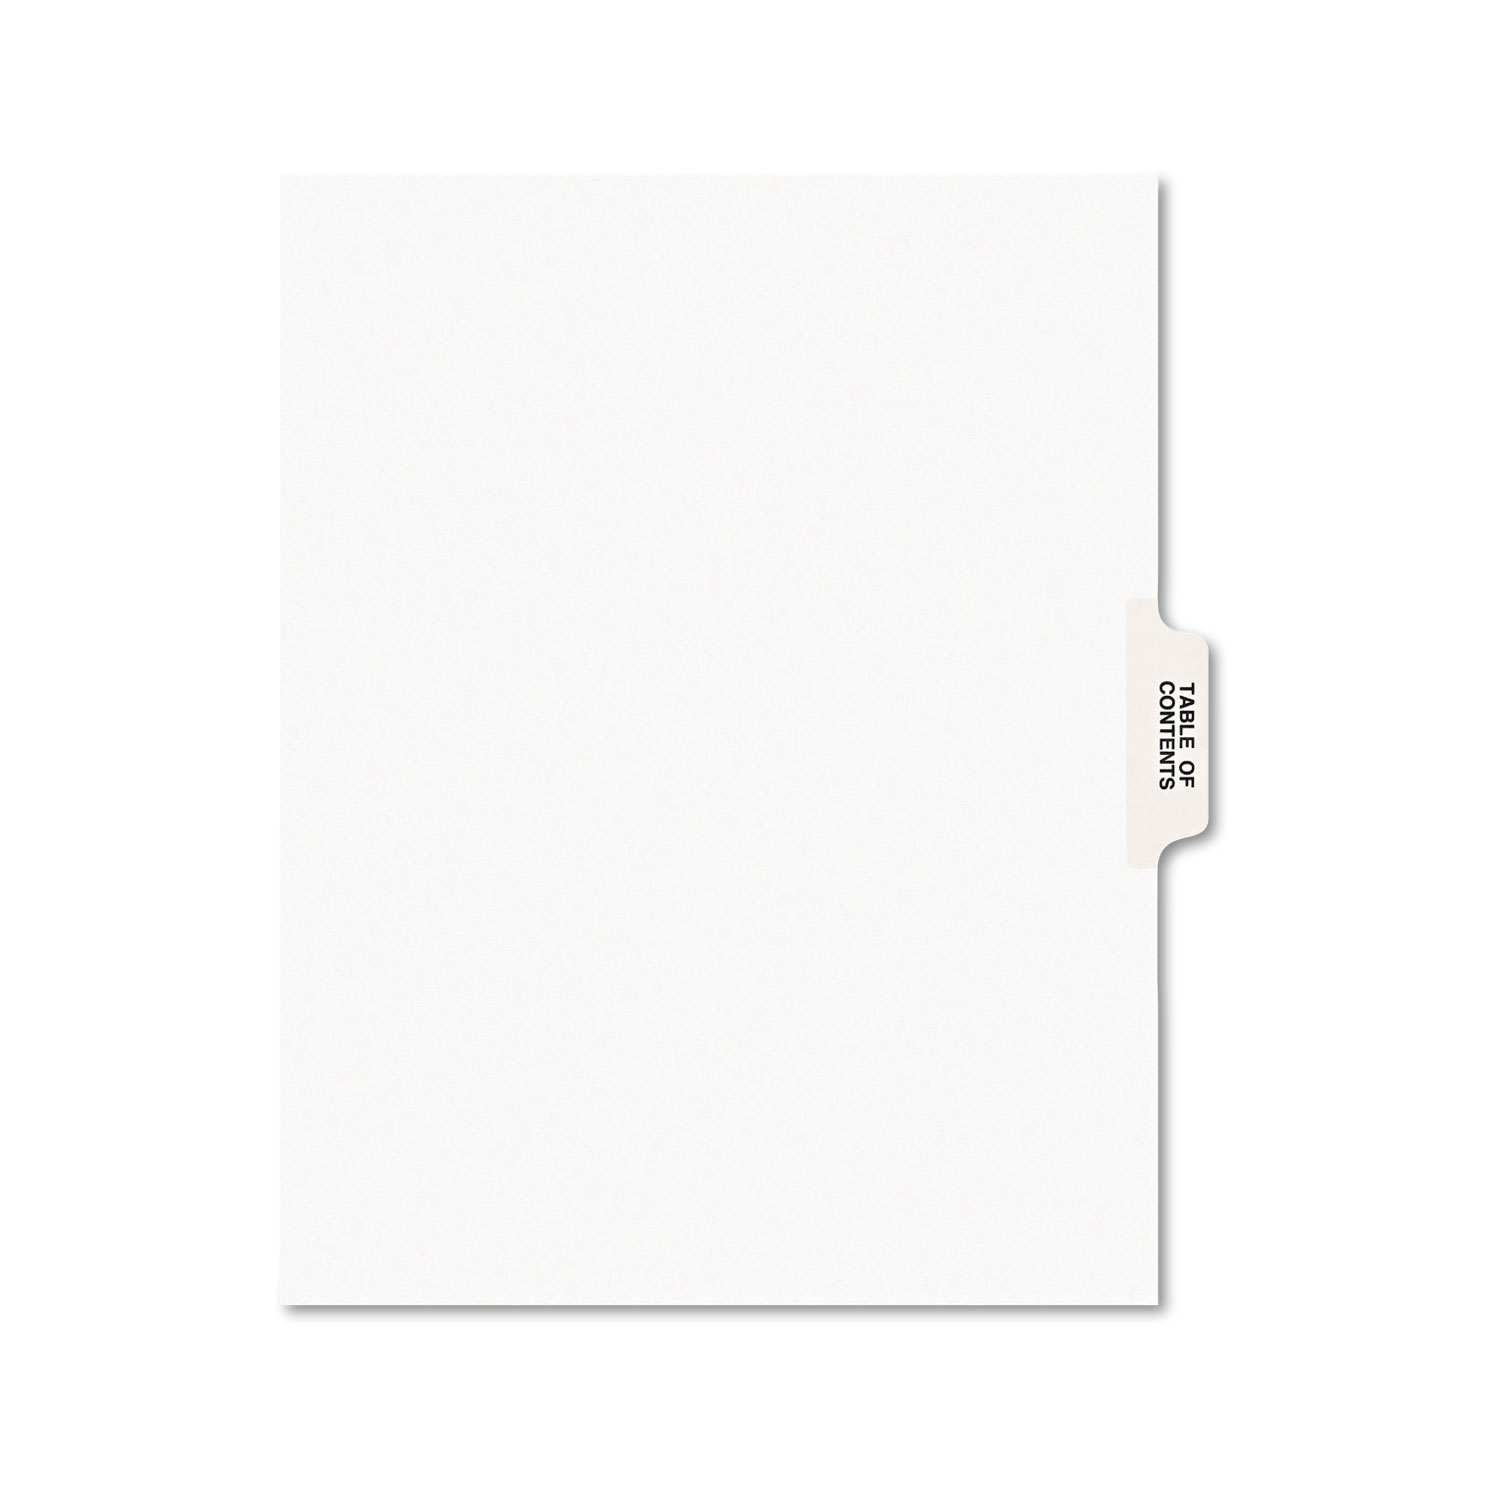  Avery 11910 Preprinted Legal Exhibit Side Tab Index Dividers, Avery Style, 25-Tab, Table Of Contents, 11 x 8.5, White, 25/Pack (AVE11910) 